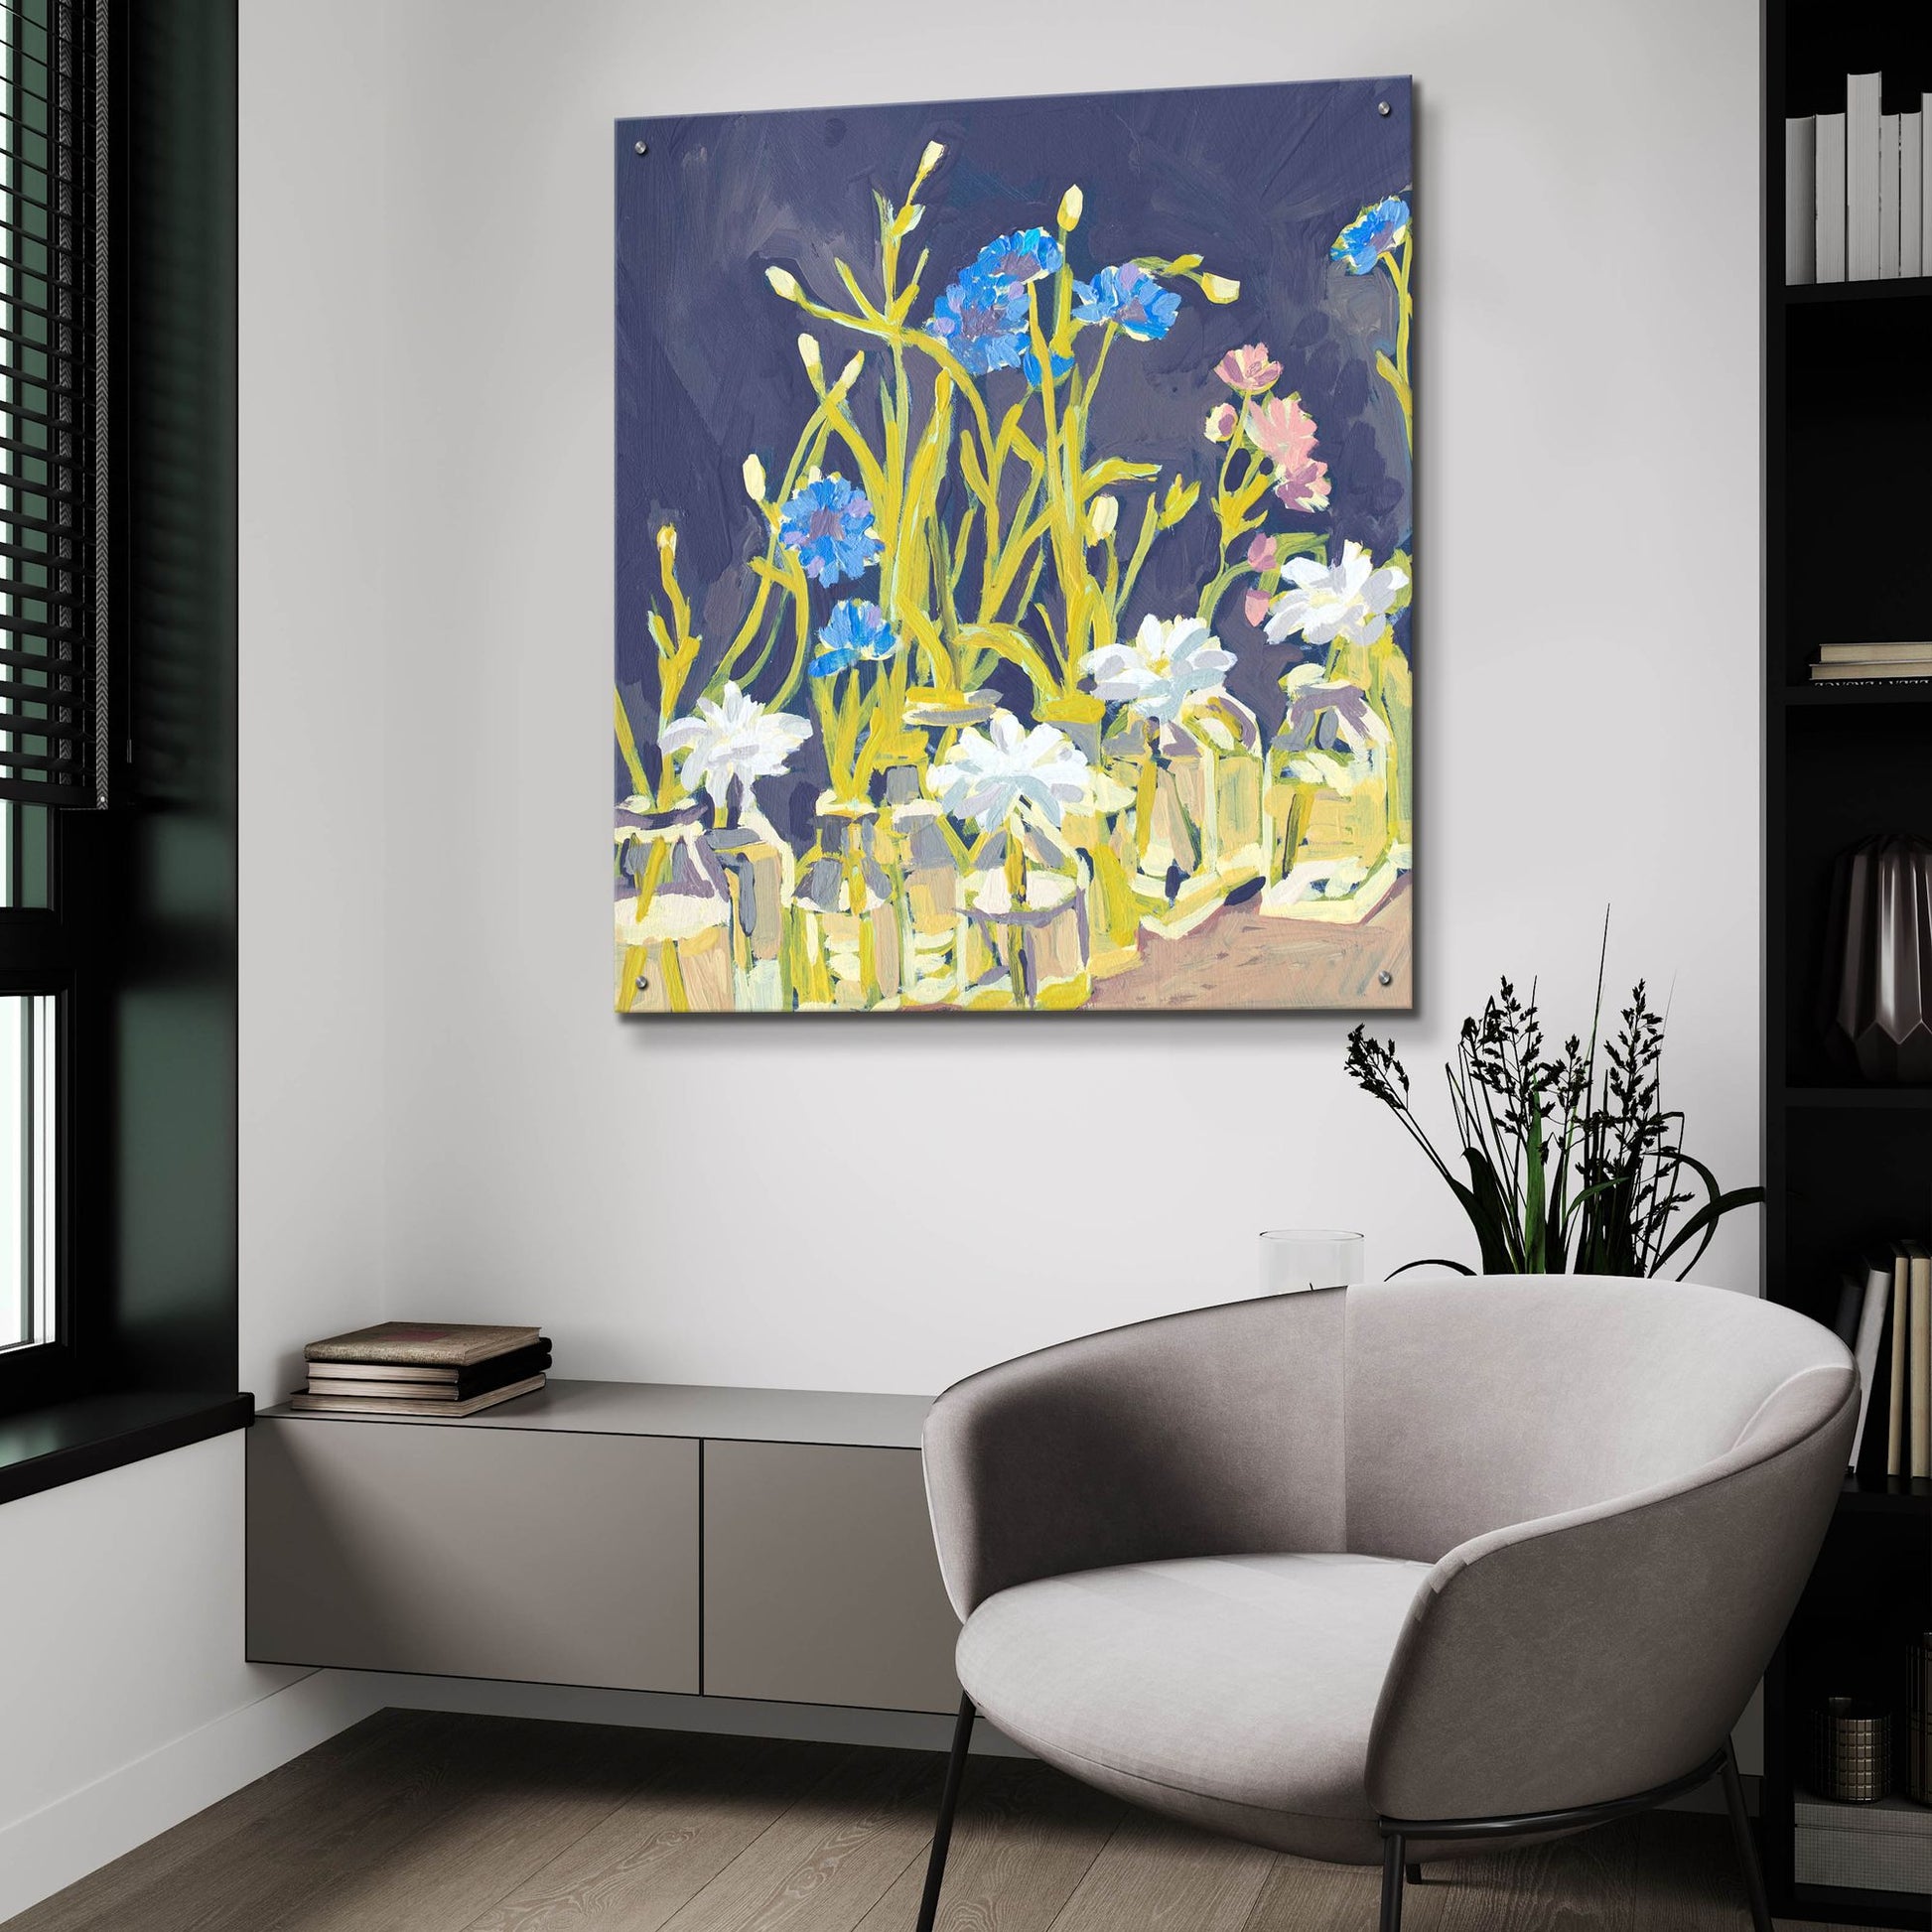 Epic Art 'Floral and Glass Menagerie' by Victoria Macmillan, Acrylic Glass Wall Art,36x36